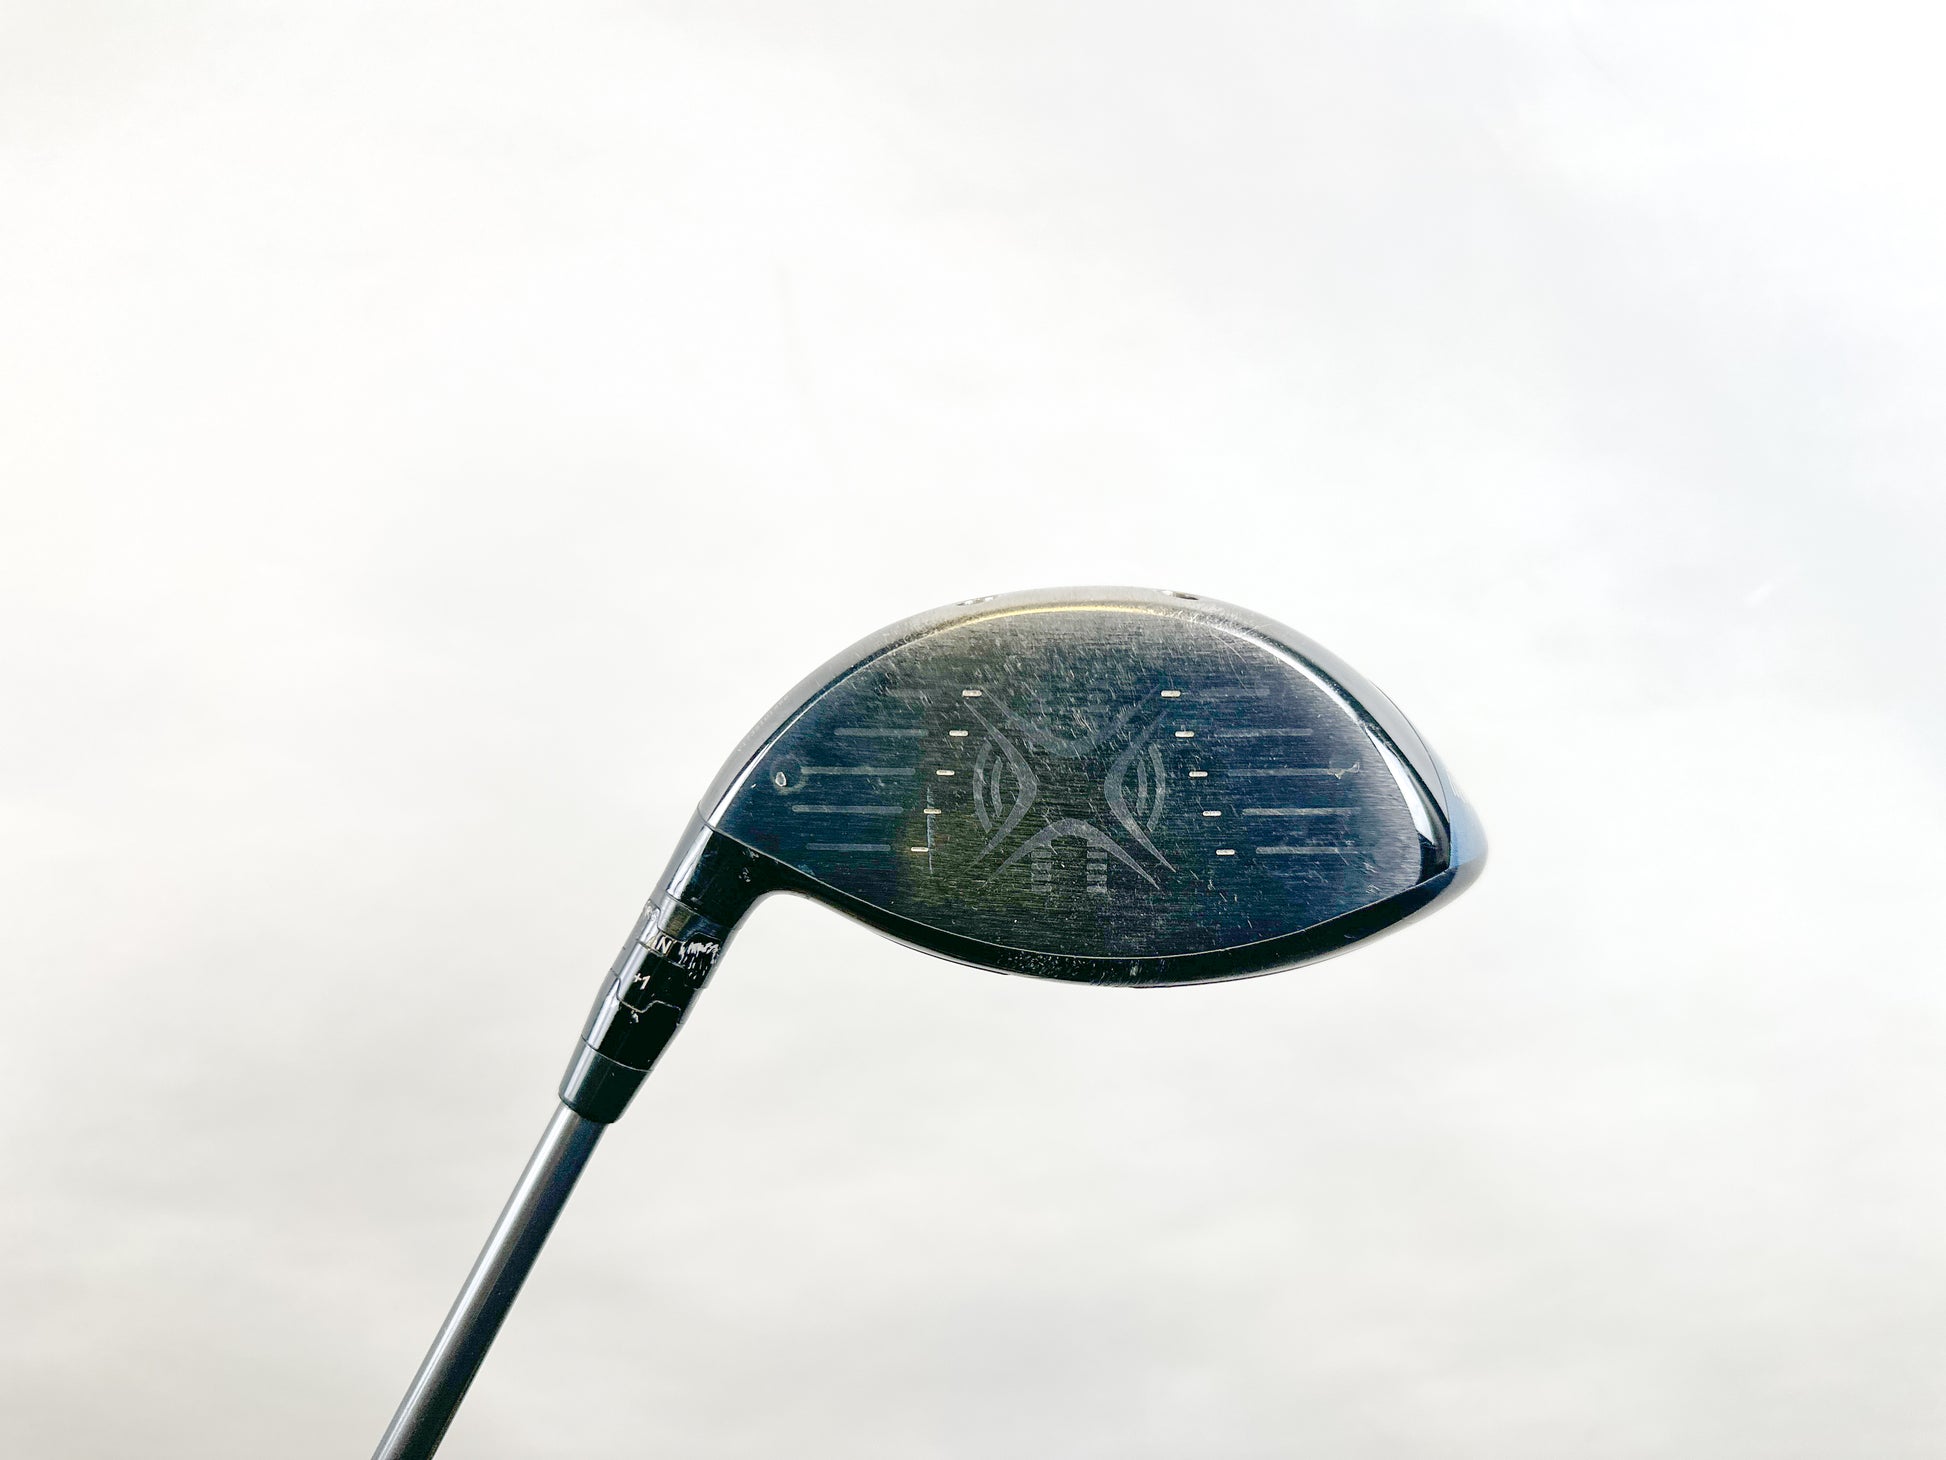 Used Callaway Rogue Driver - Right-Handed - 13.5 Degrees - Regular Flex-Next Round